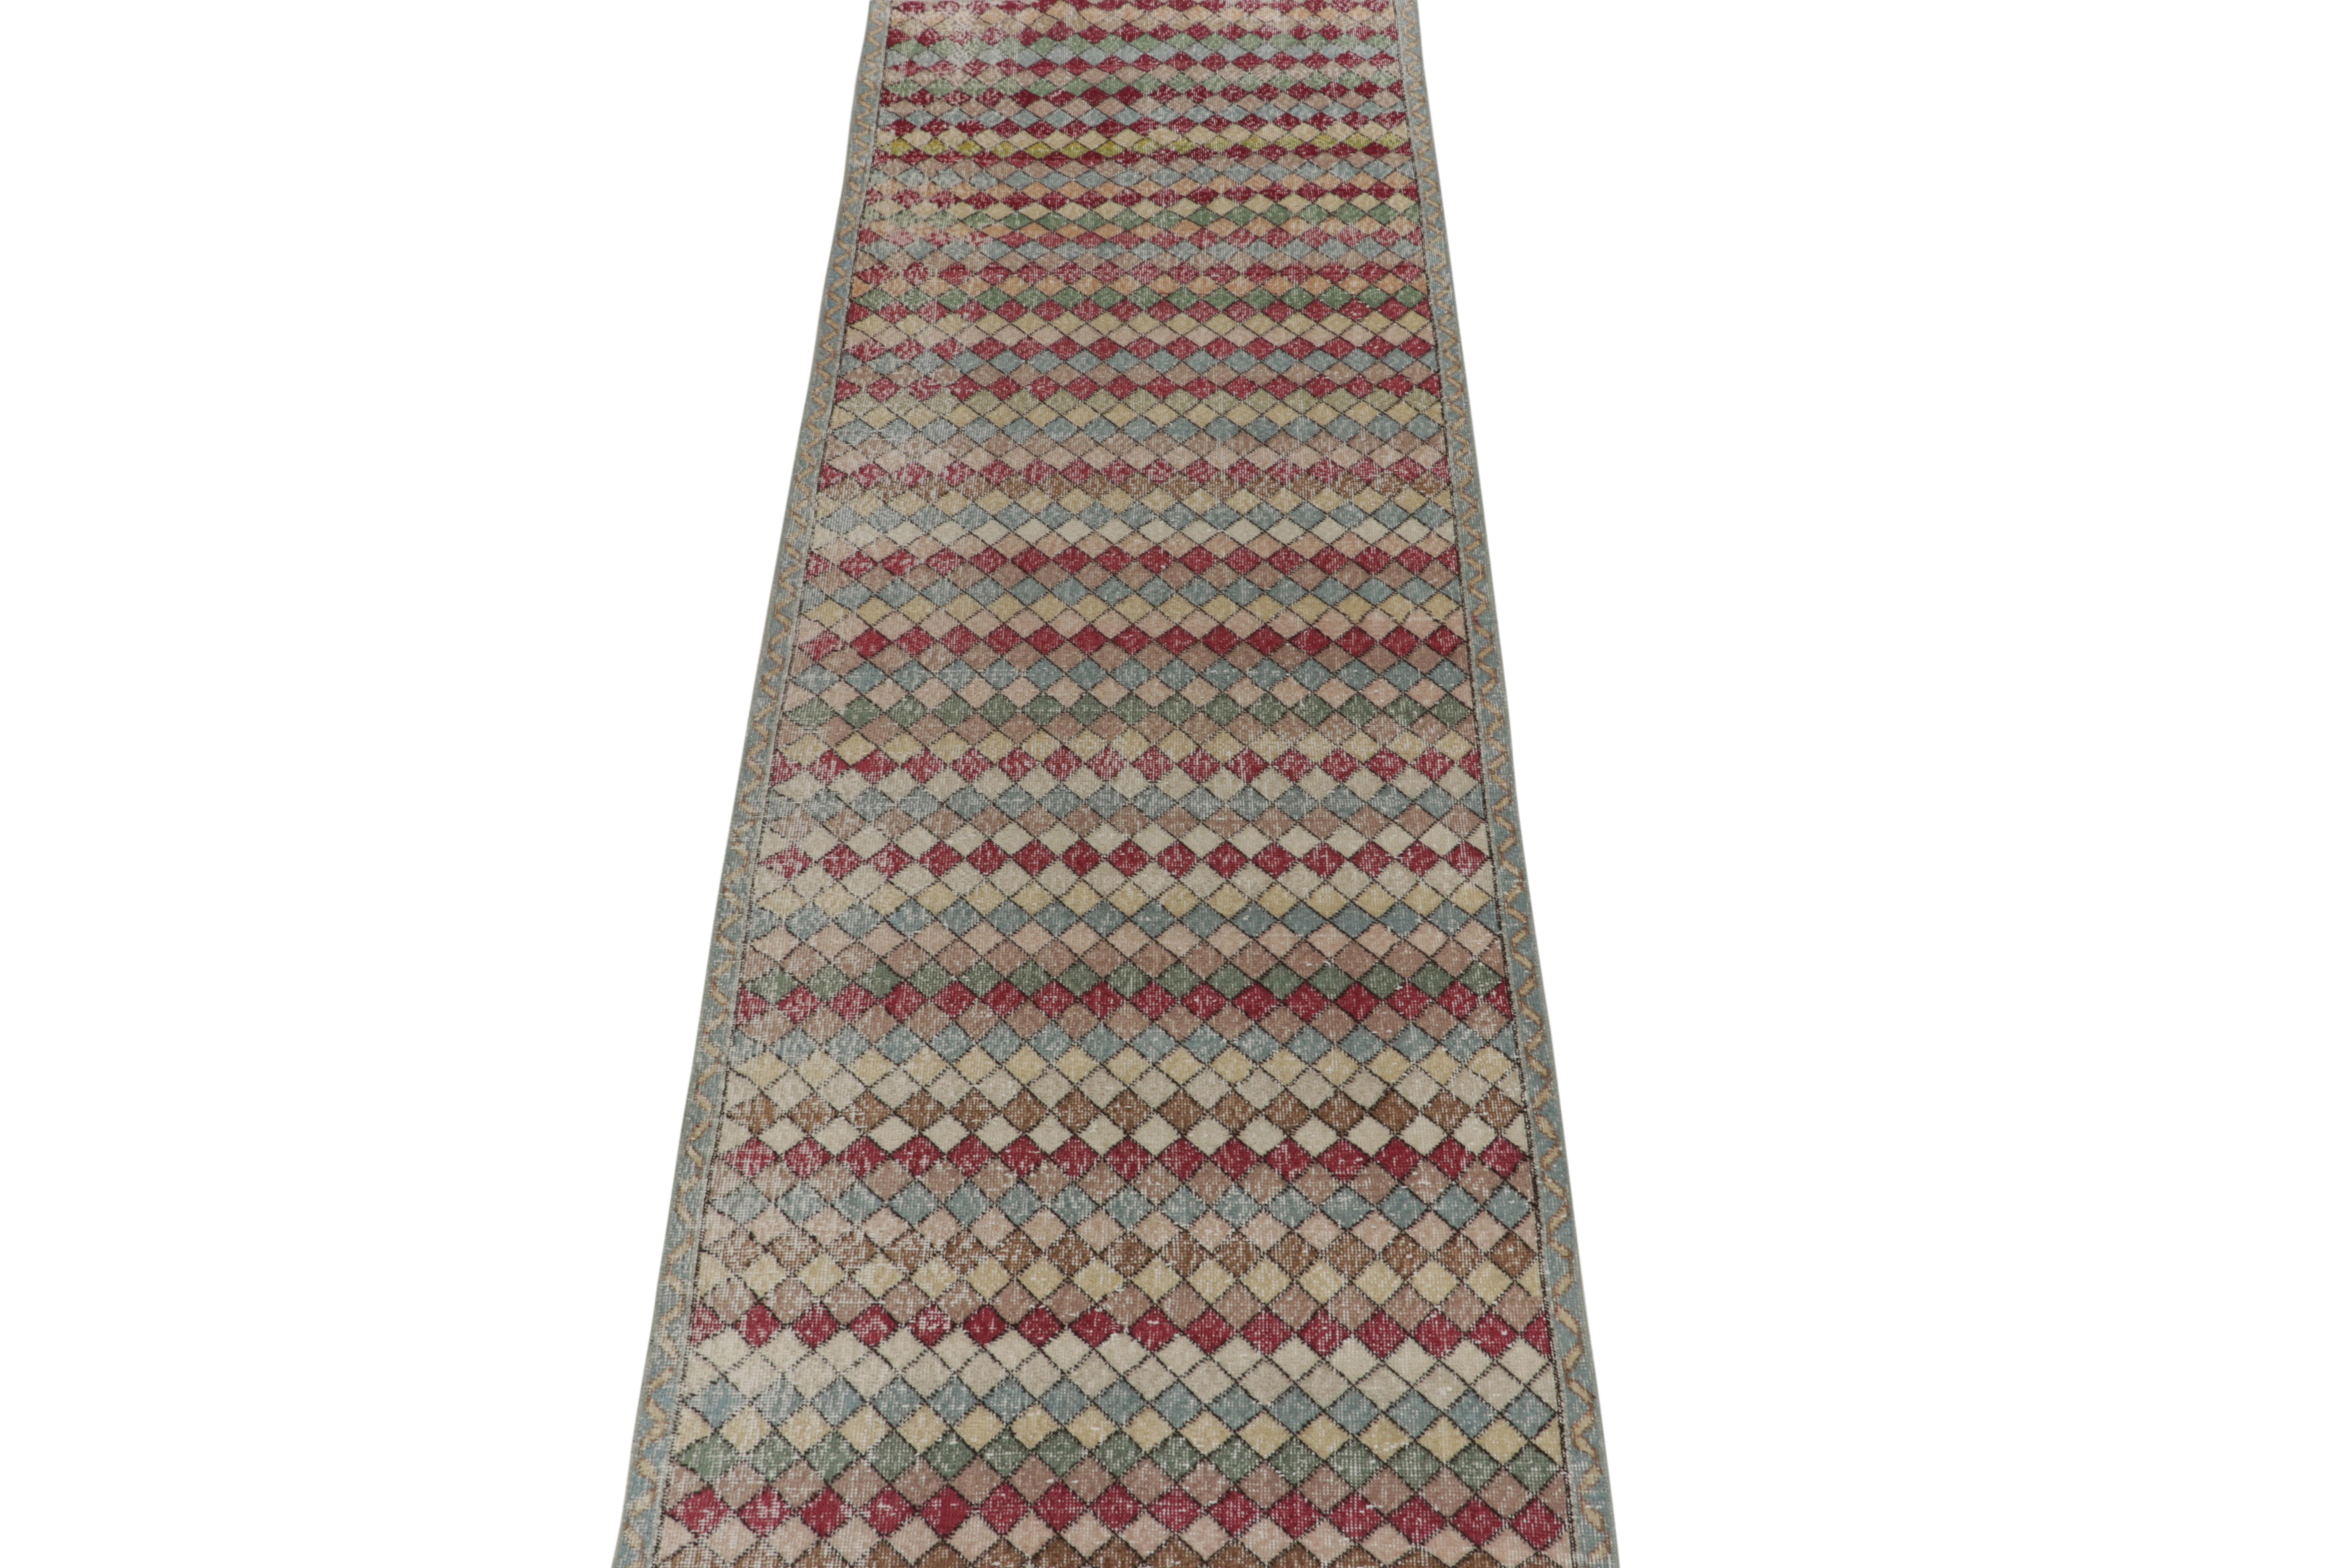 A 4x11 vintage rug exemplifying rare Turkish art deco sensibilities, among the latest to join our mid century Pasha Collection. 

Curated from a bold Turkish designer, this 1960s piece features a well defined diamond pattern in especially blue,